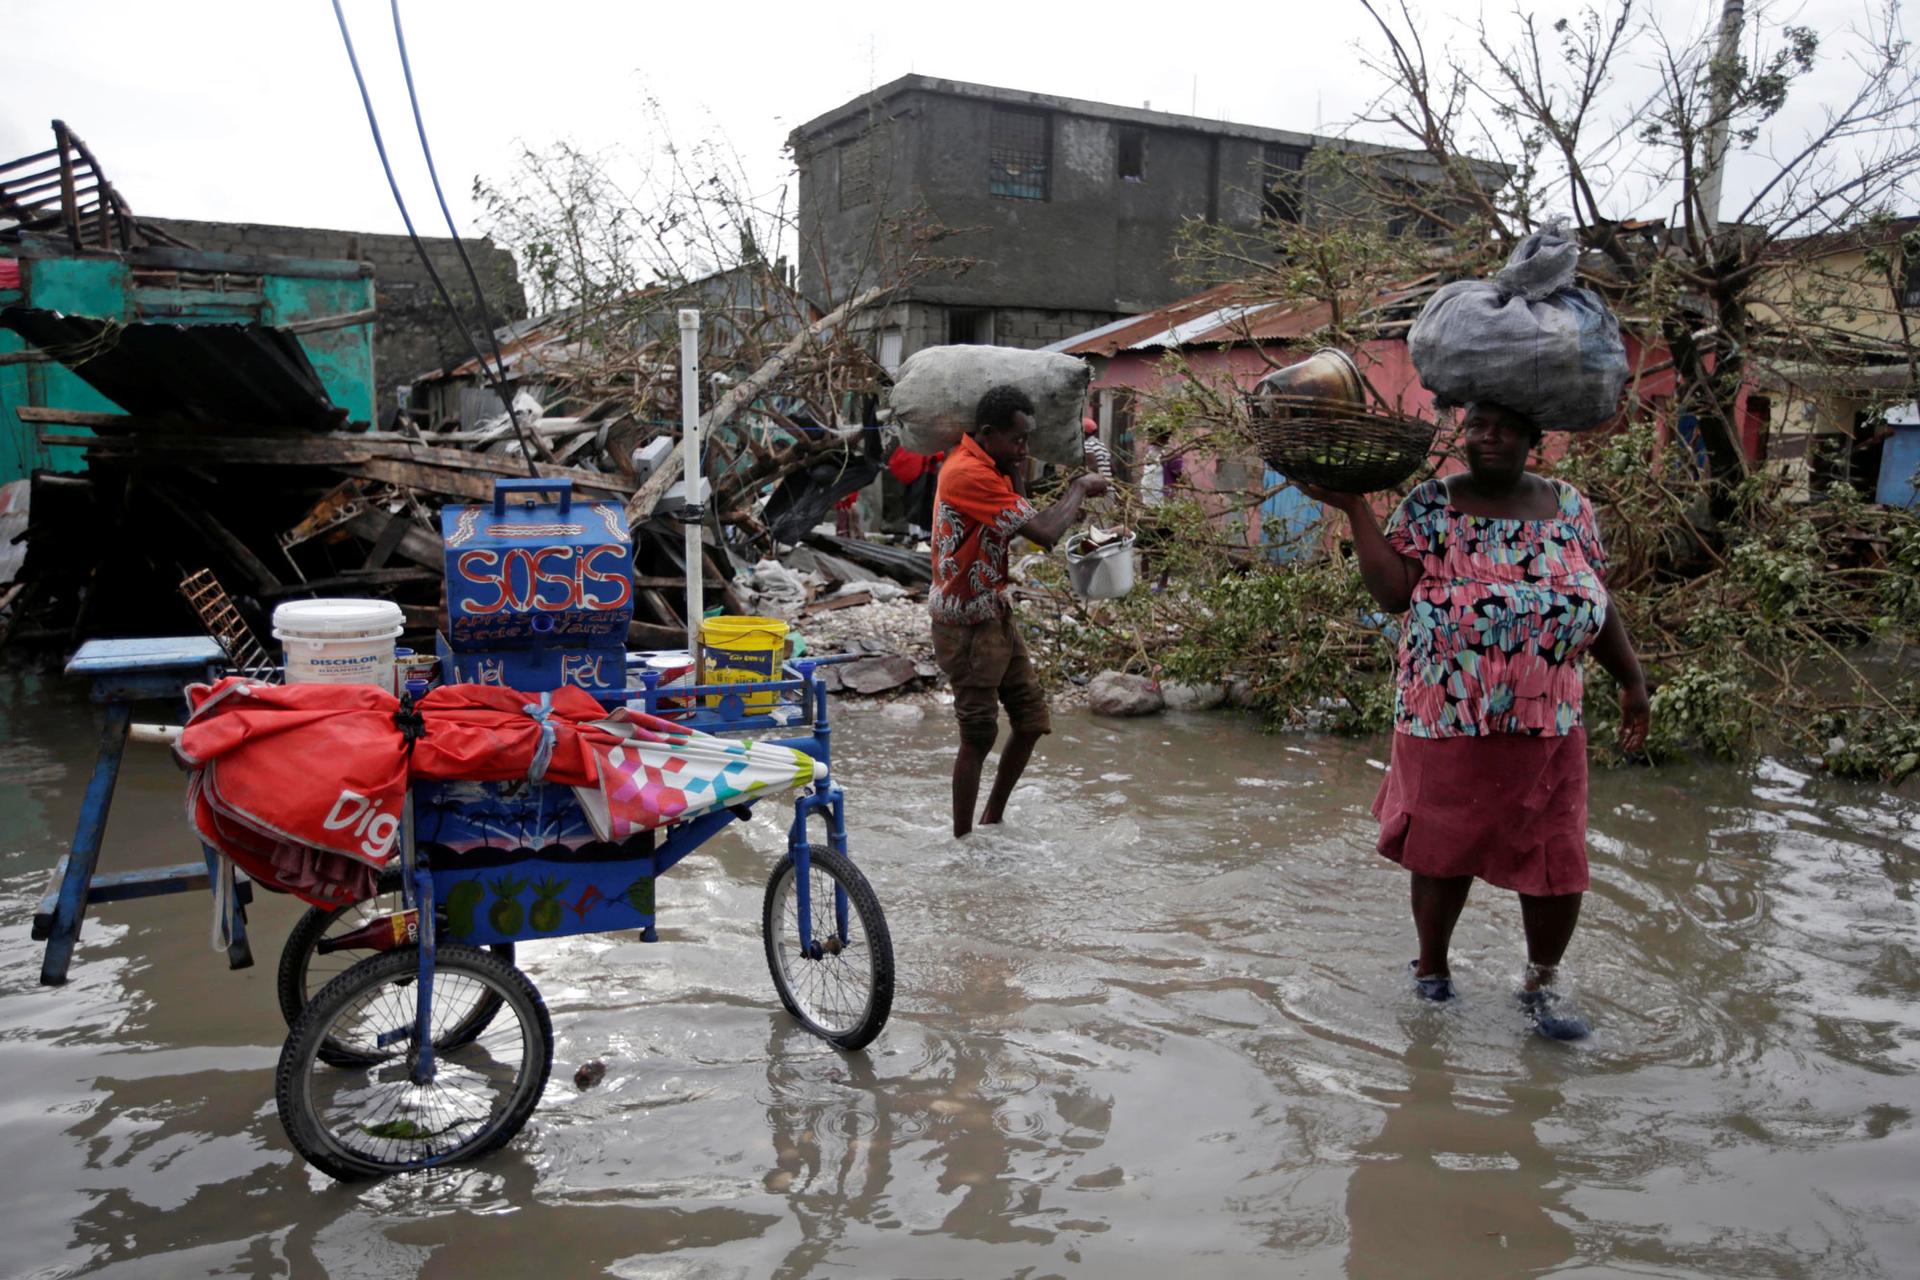 Residents amble through a flooded area after Hurricane Matthew in Les Cayes, Haiti.